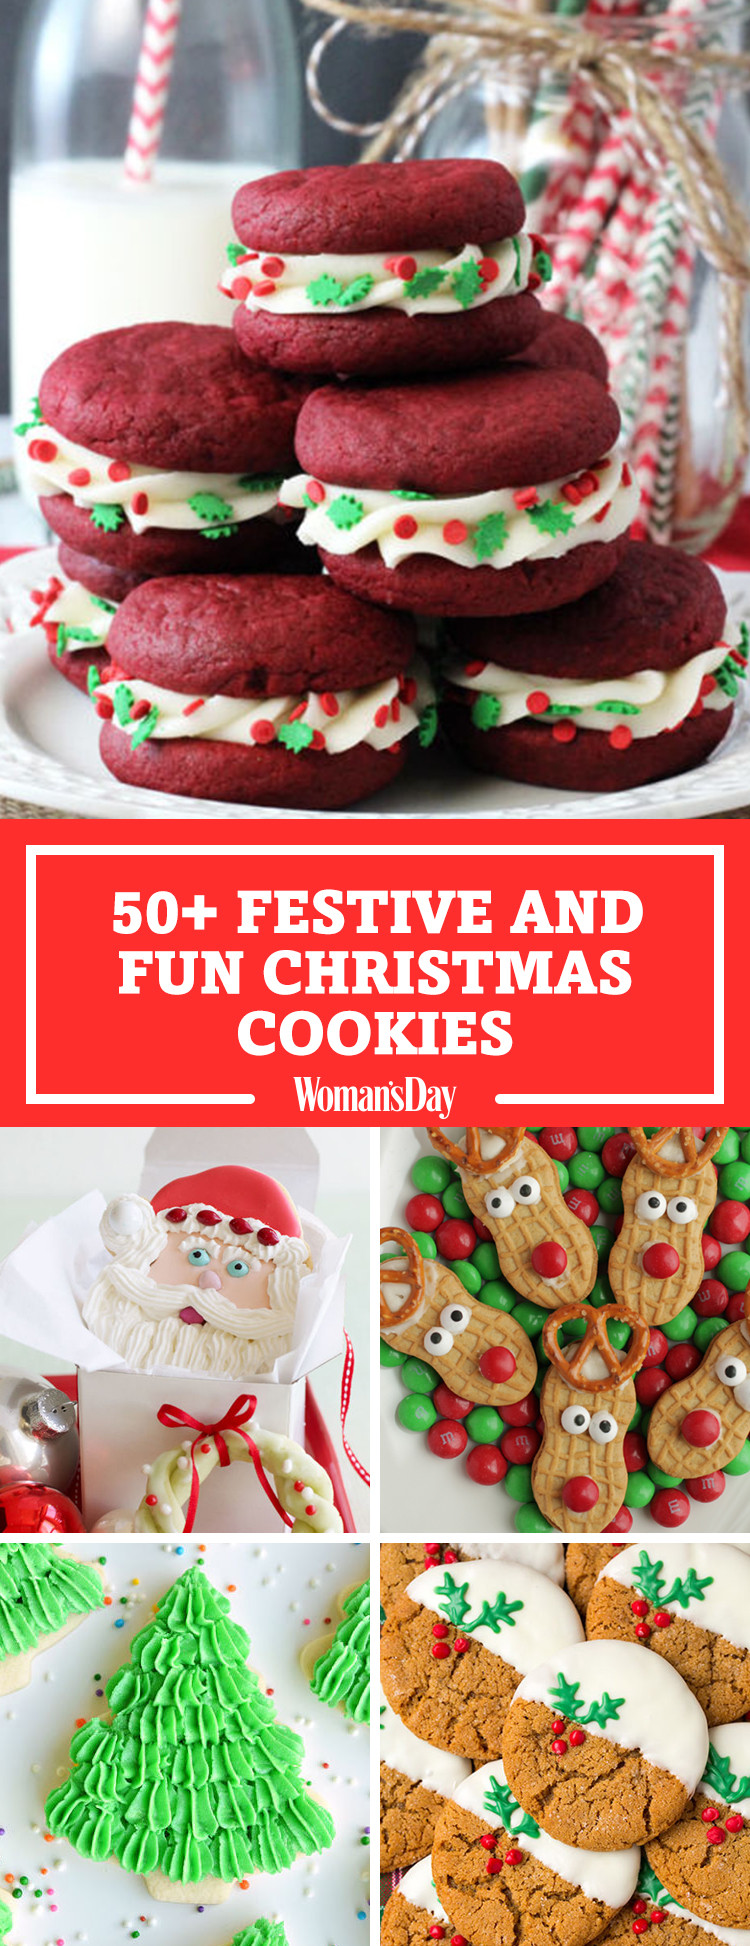 Fun Christmas Baking Ideas
 59 Easy Christmas Cookies Best Recipes for Holiday